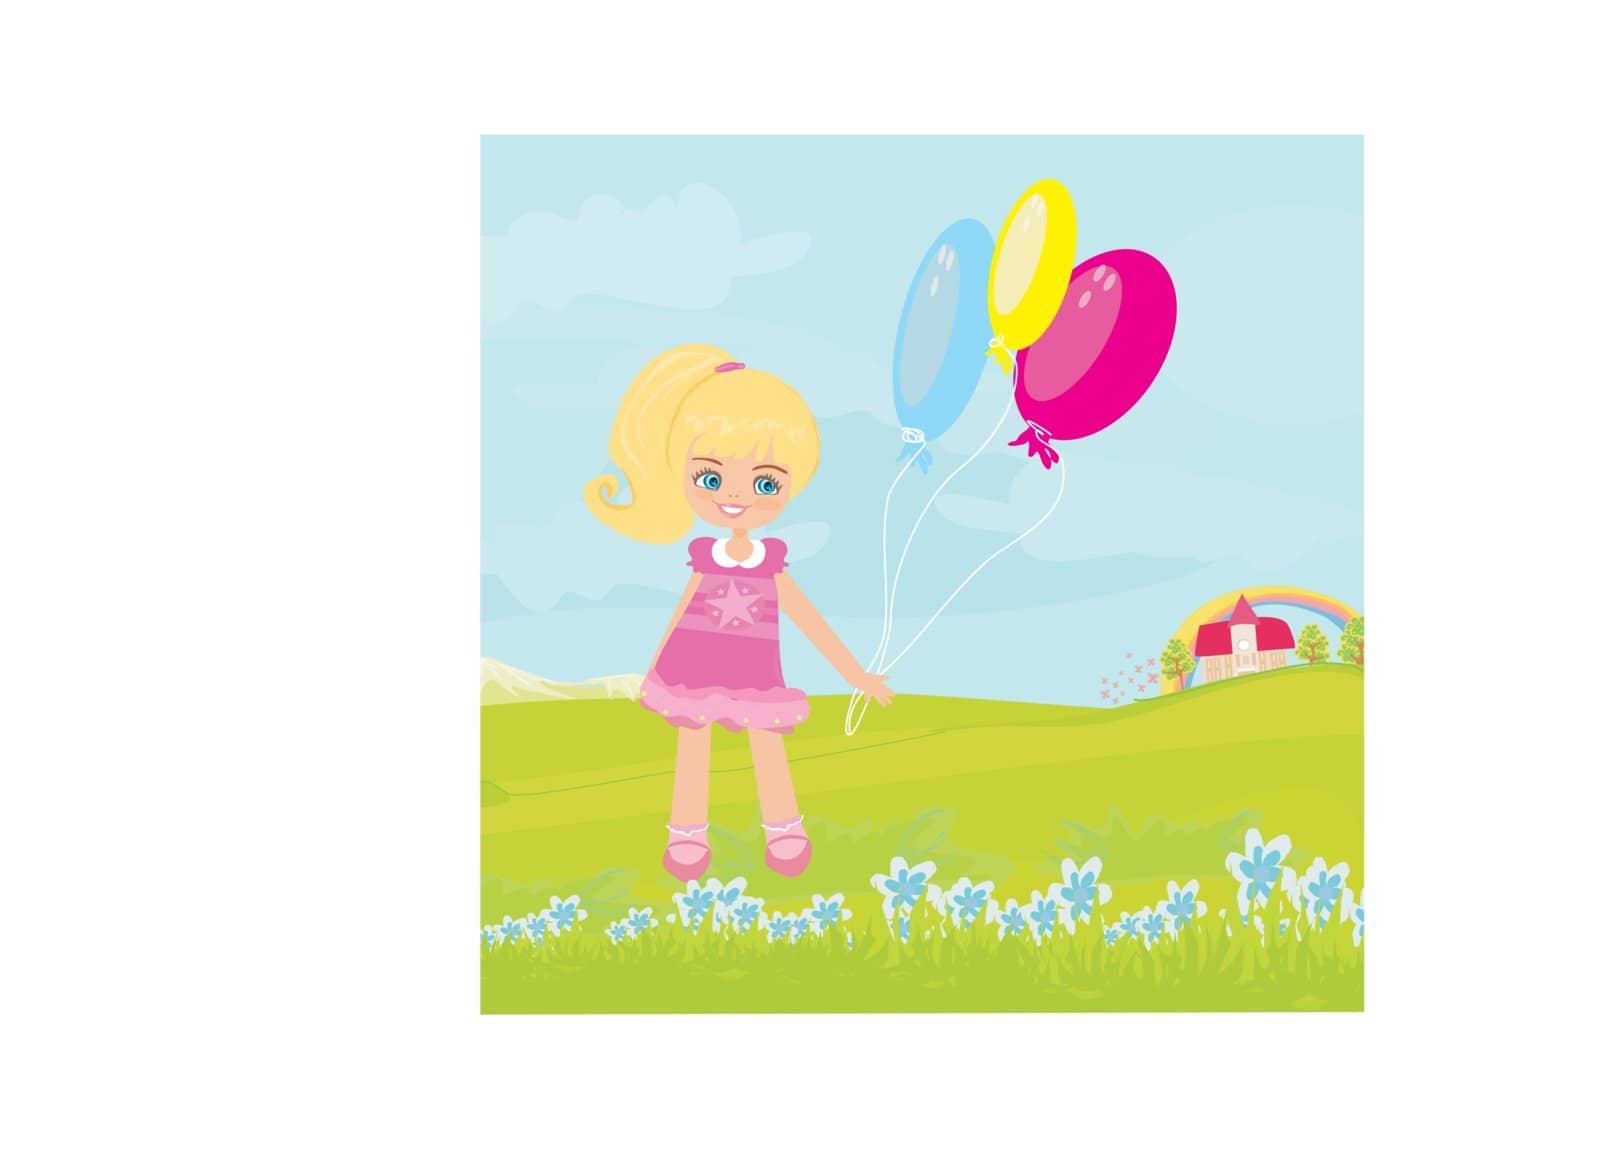 Happy little girl with balloons. by JackyBrown